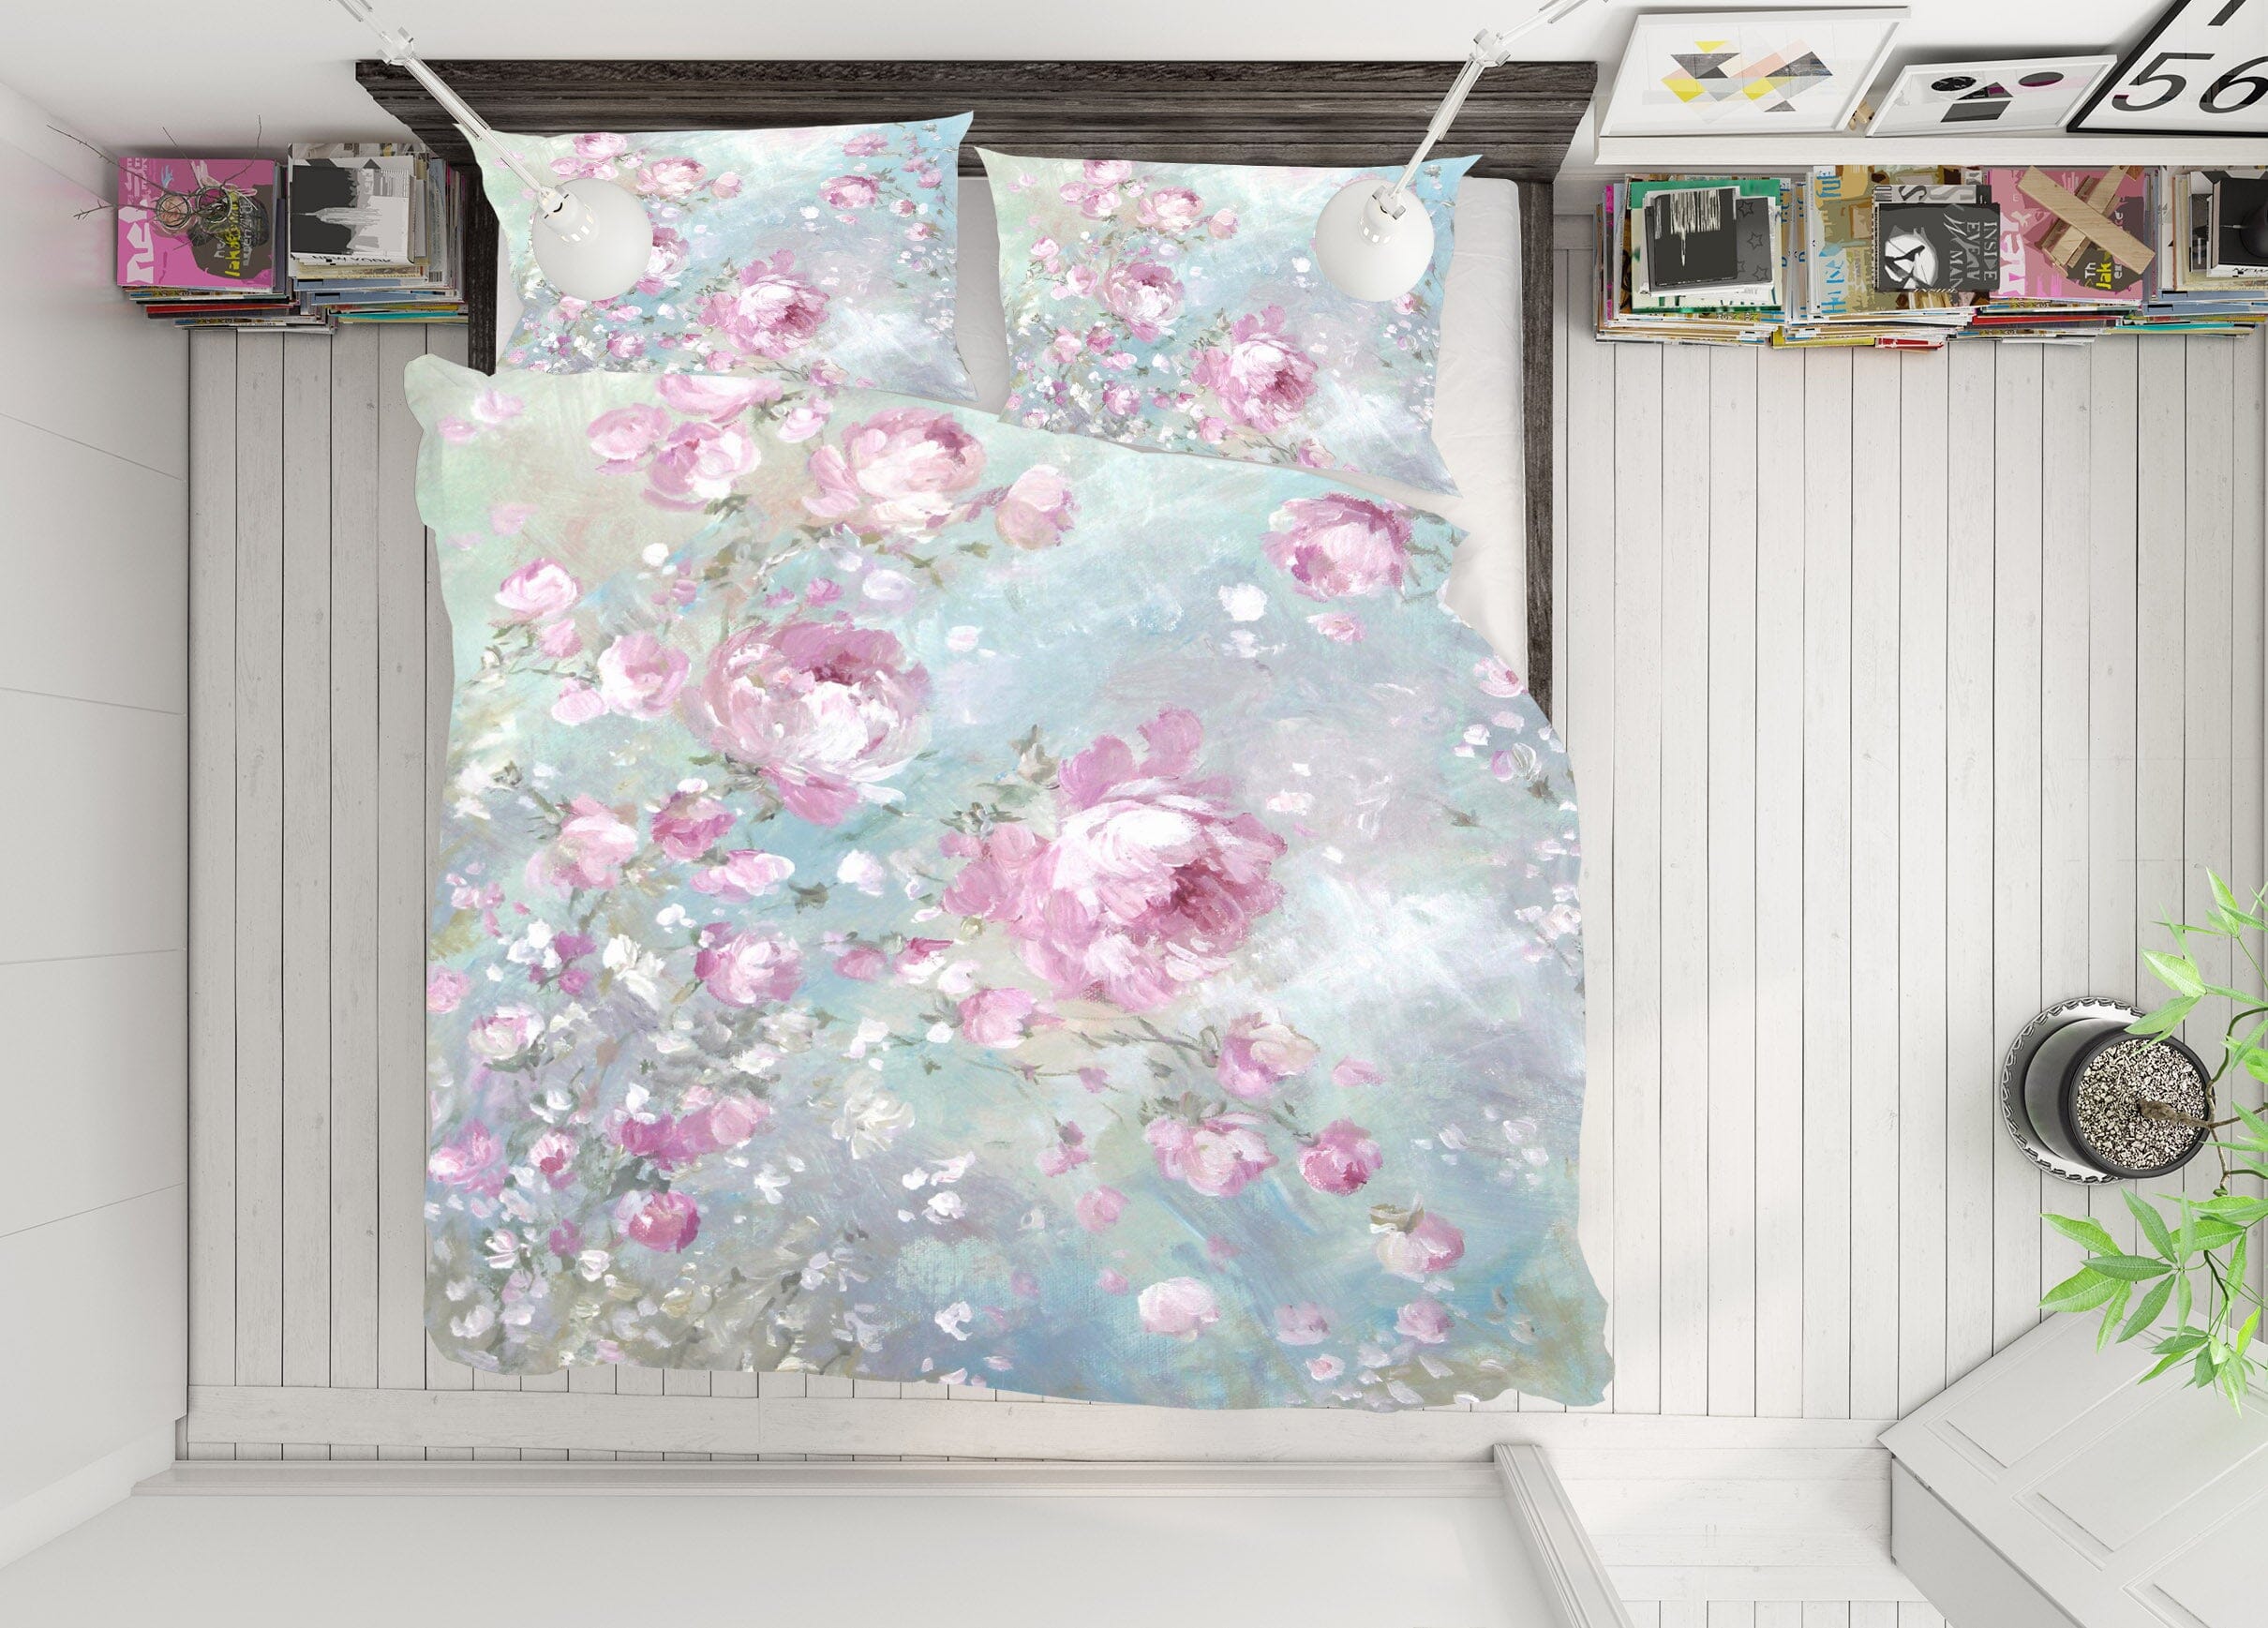 3D Rose Bunch 036 Debi Coules Bedding Bed Pillowcases Quilt Quiet Covers AJ Creativity Home 